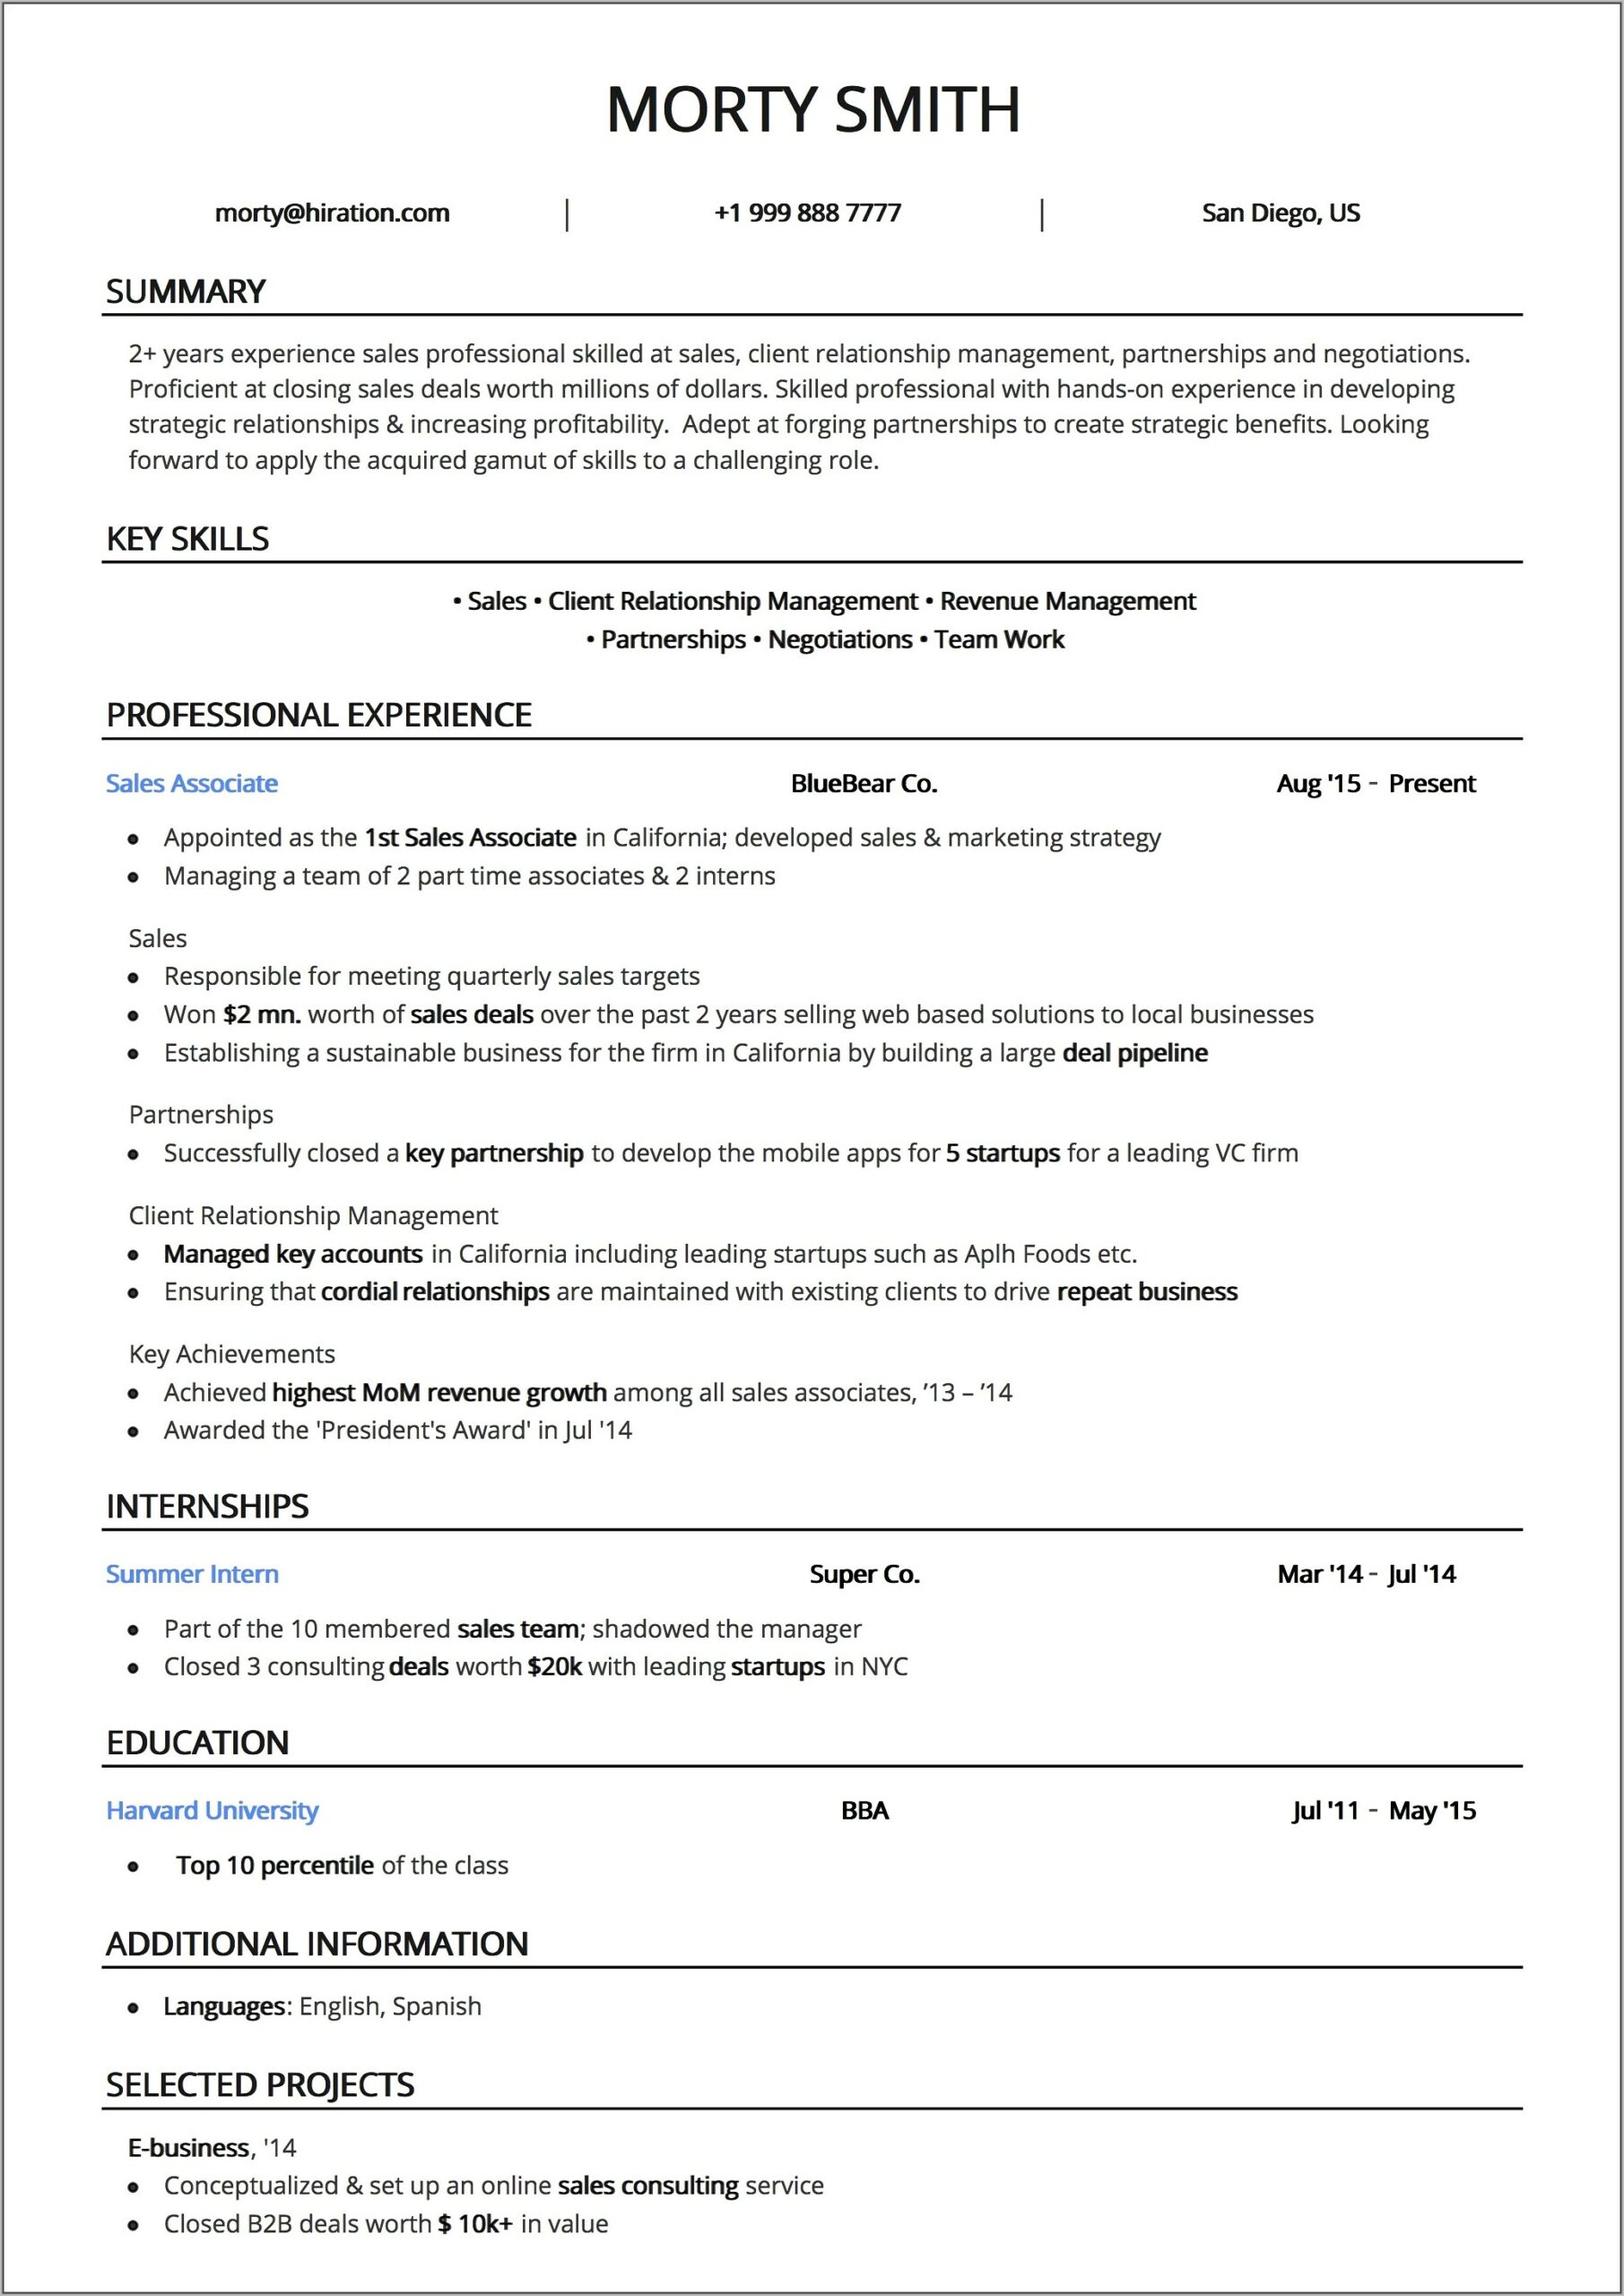 Samples Of Best Professional Resumes